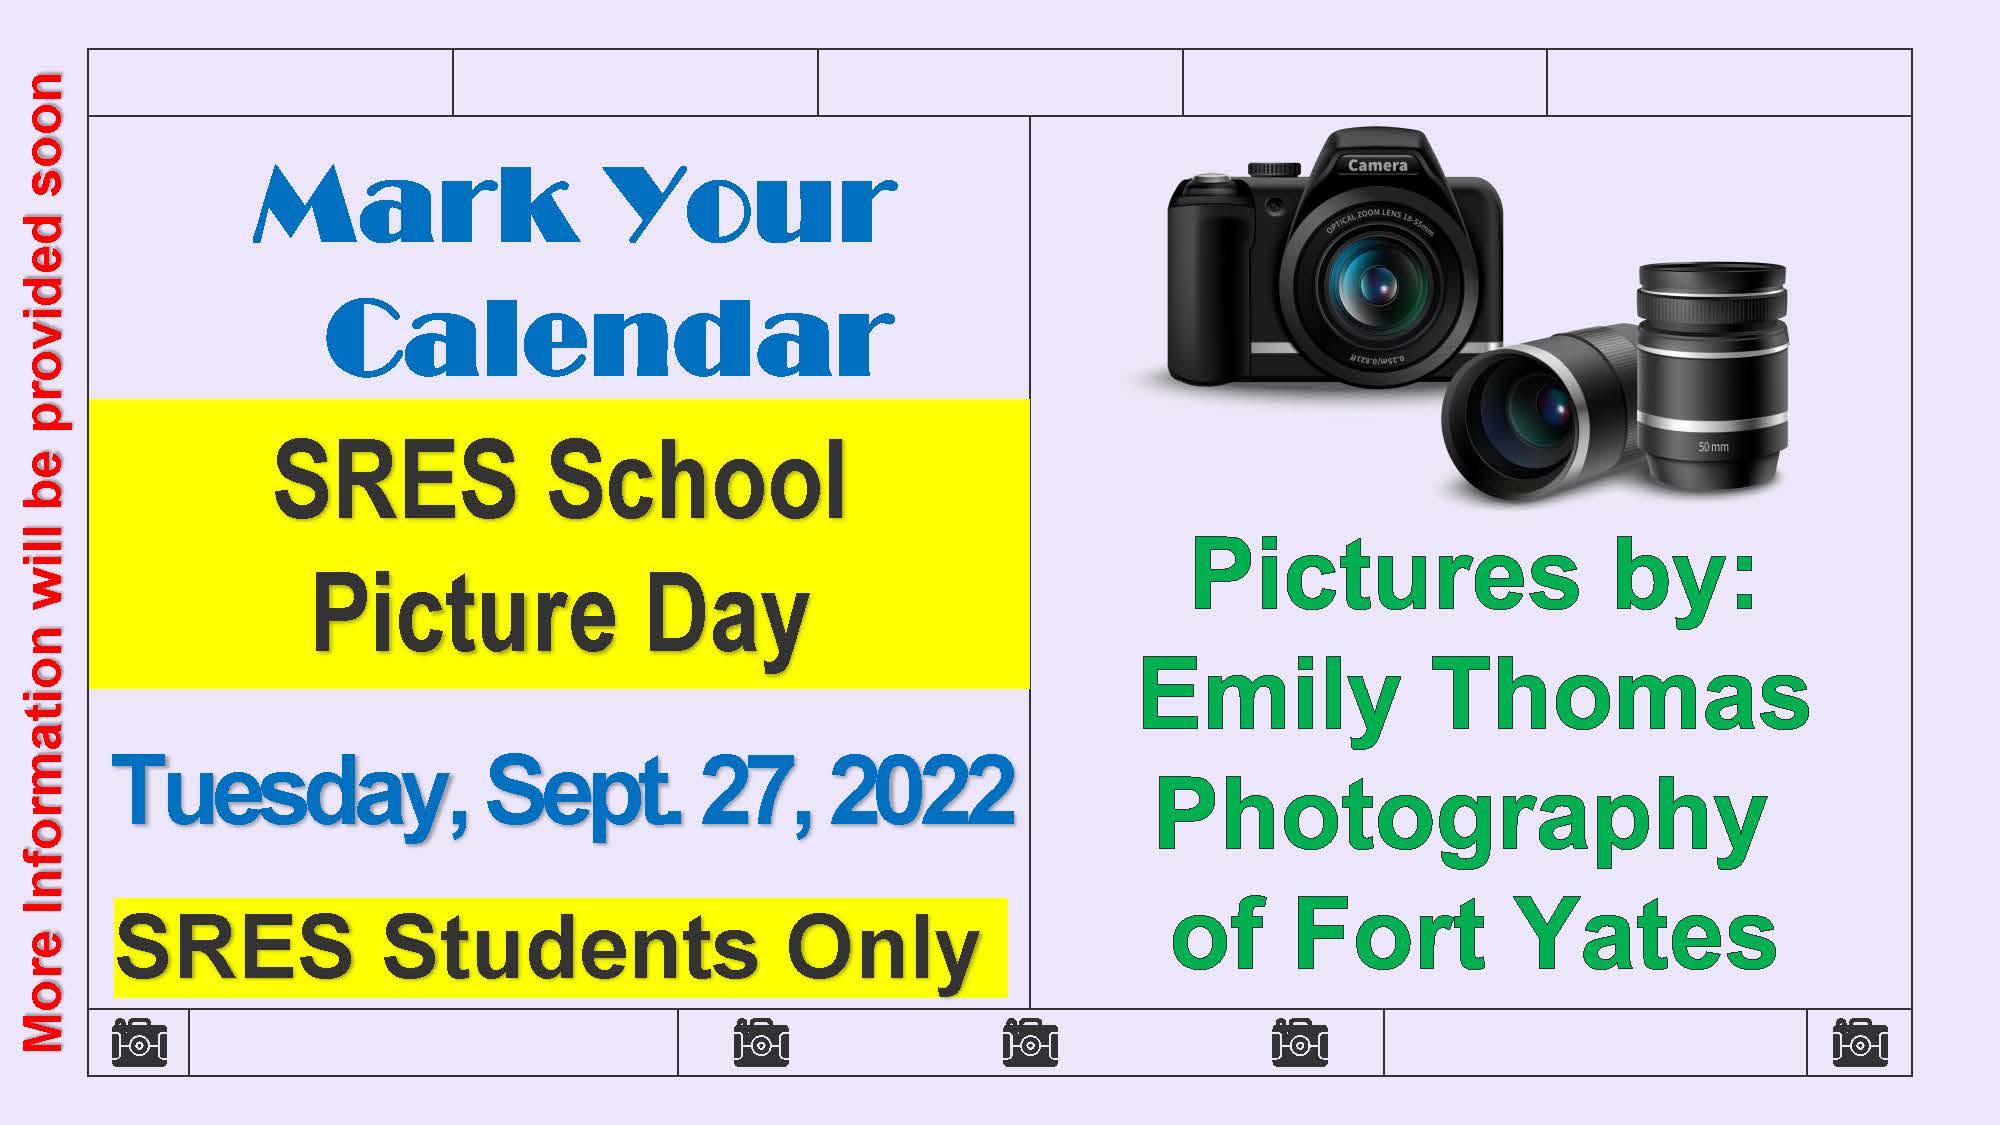 Mark your calendar SRES School picture day Tuesday, Sept 27, 2022 SRES students only Pictures by: Emily Thomas of Fort Yates